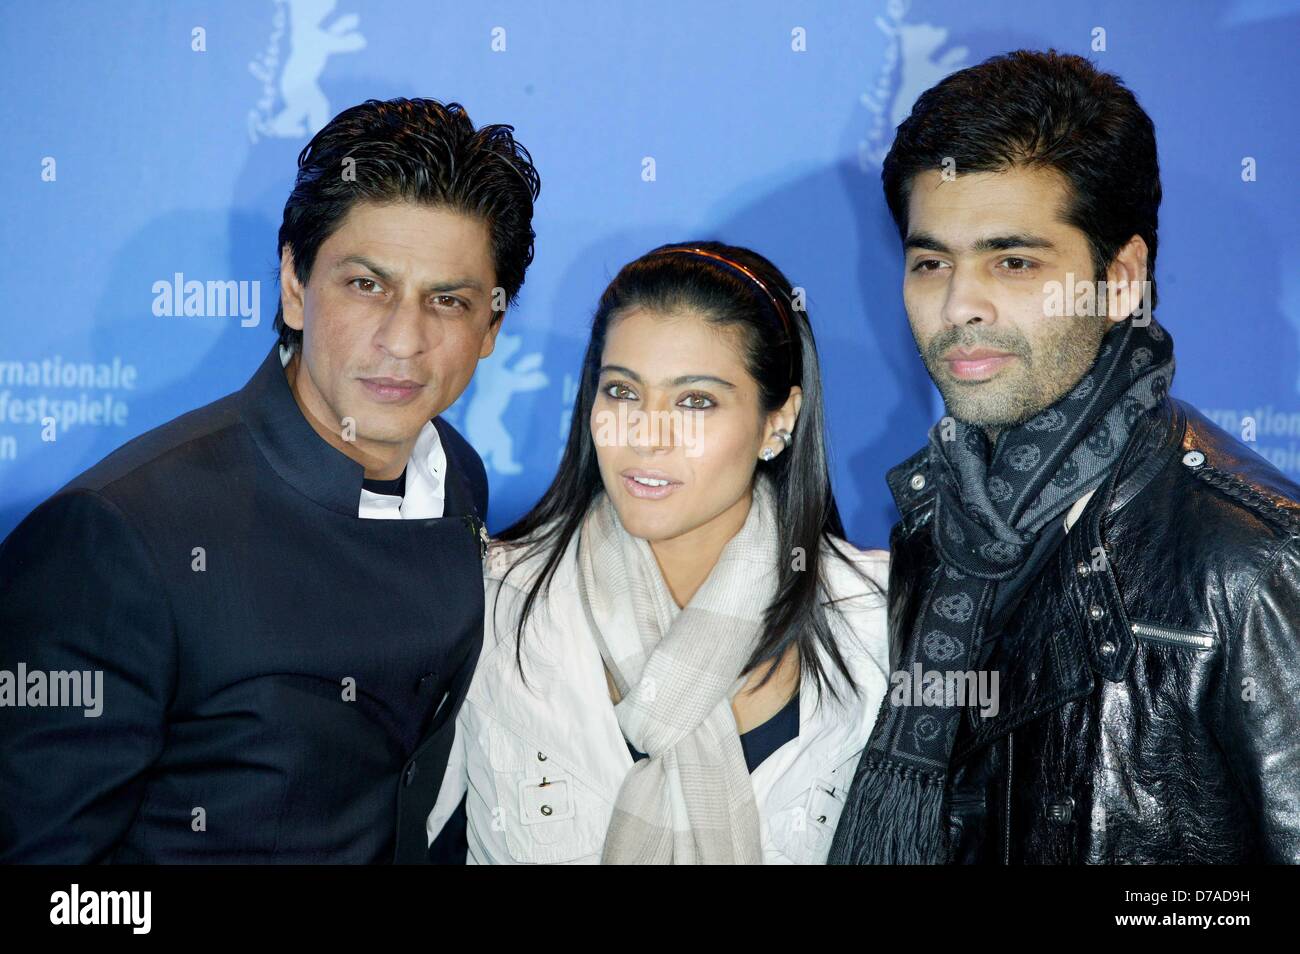 Shah Rukh Khan, Kajol Devgan and director Karan Johar (l-r) at the photocall of 'My Name is Khan' during the Berlinale in 2010 on the 12th of February in 2010. Stock Photo